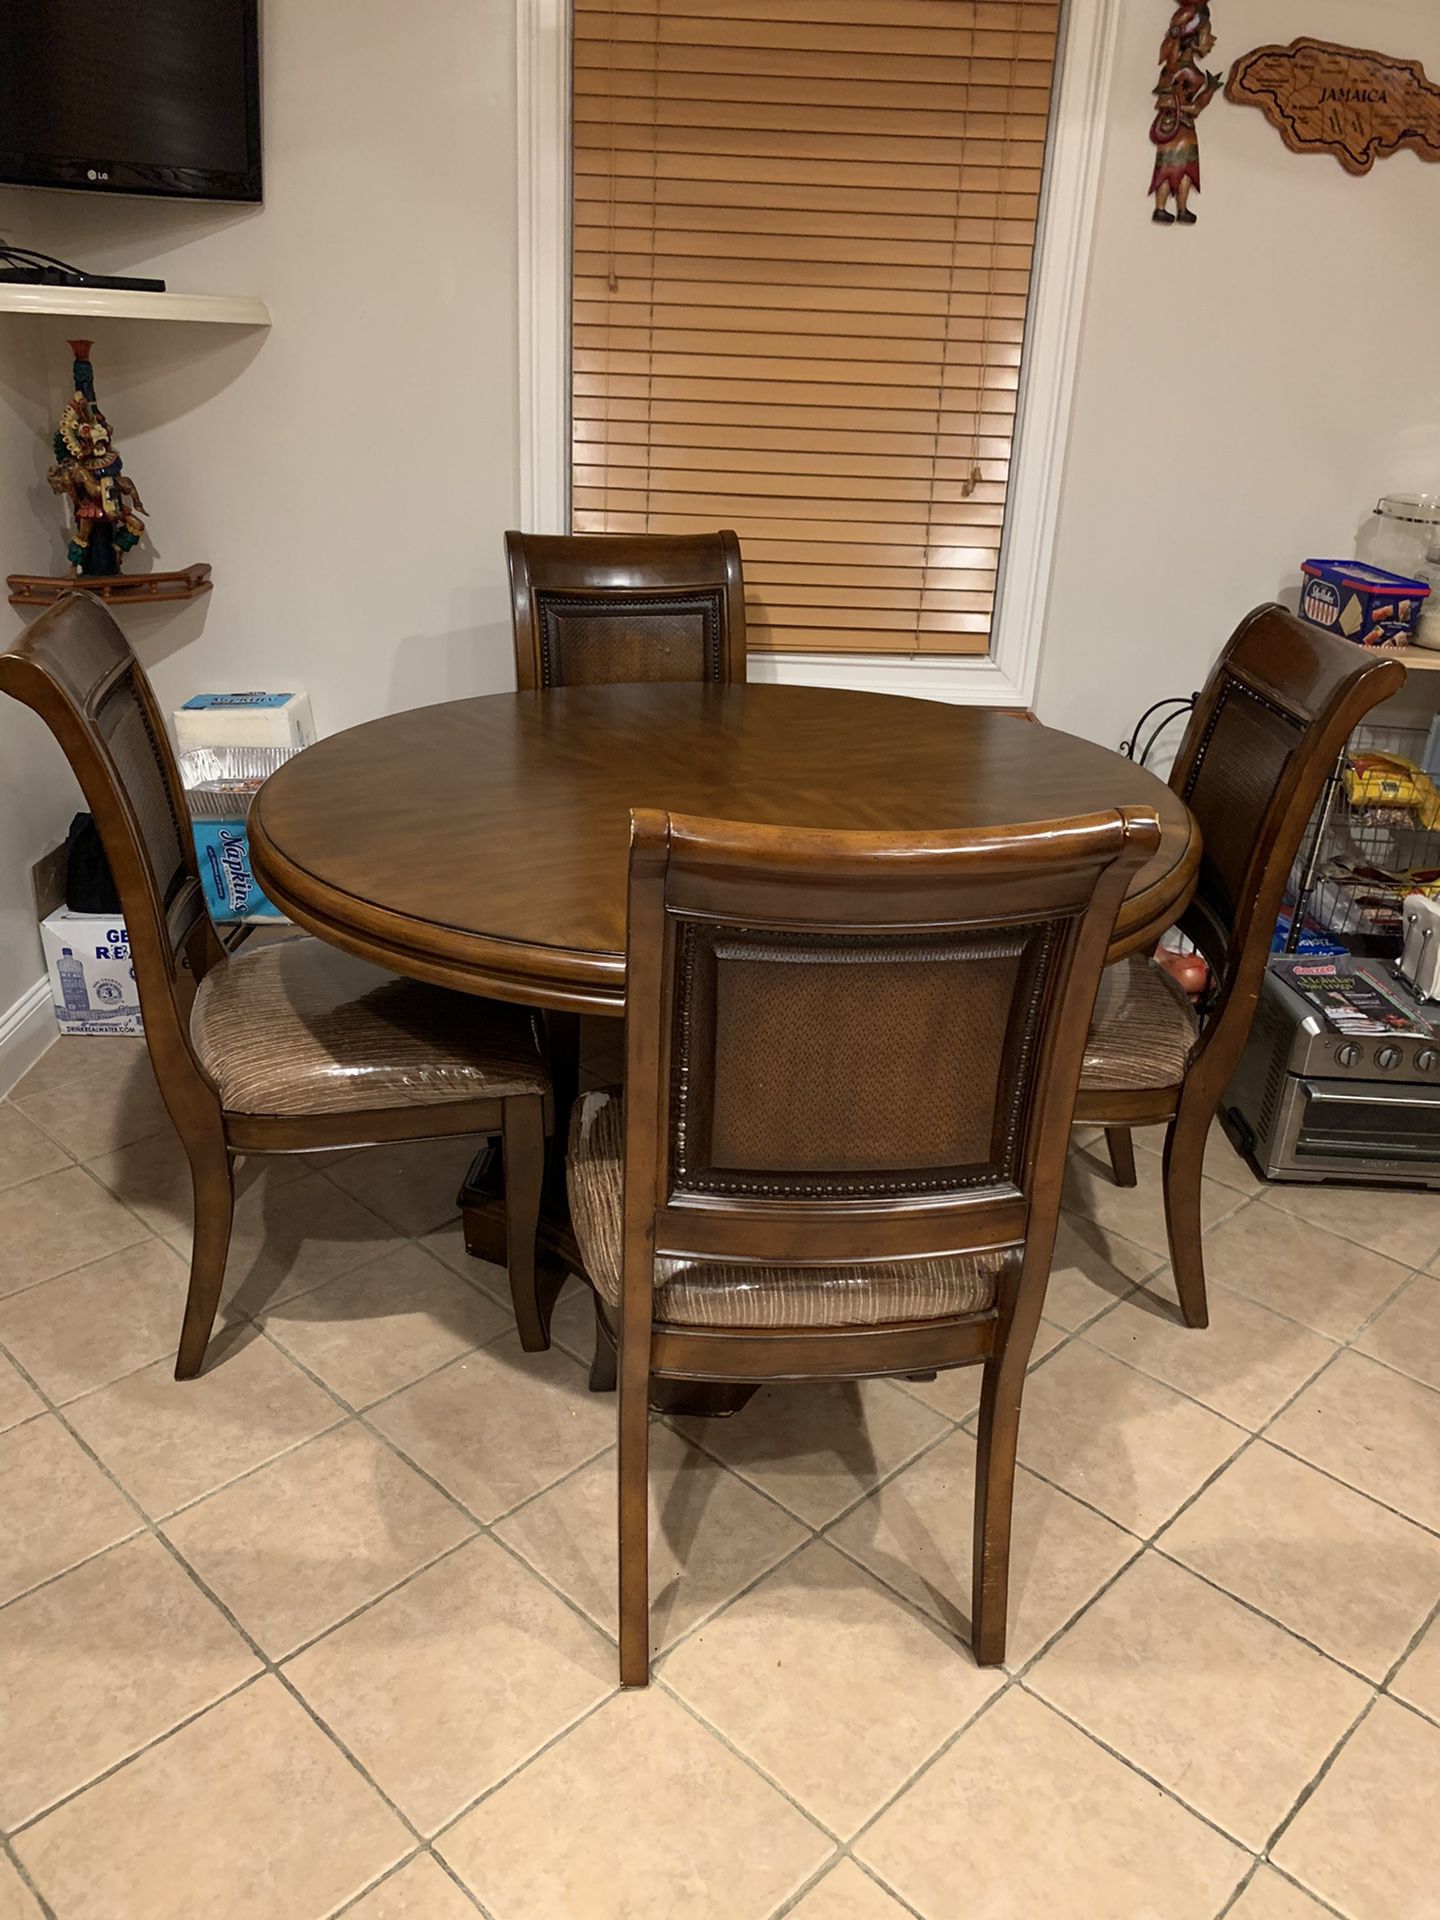 Kitchen table 54” round with 4 covered chairs.